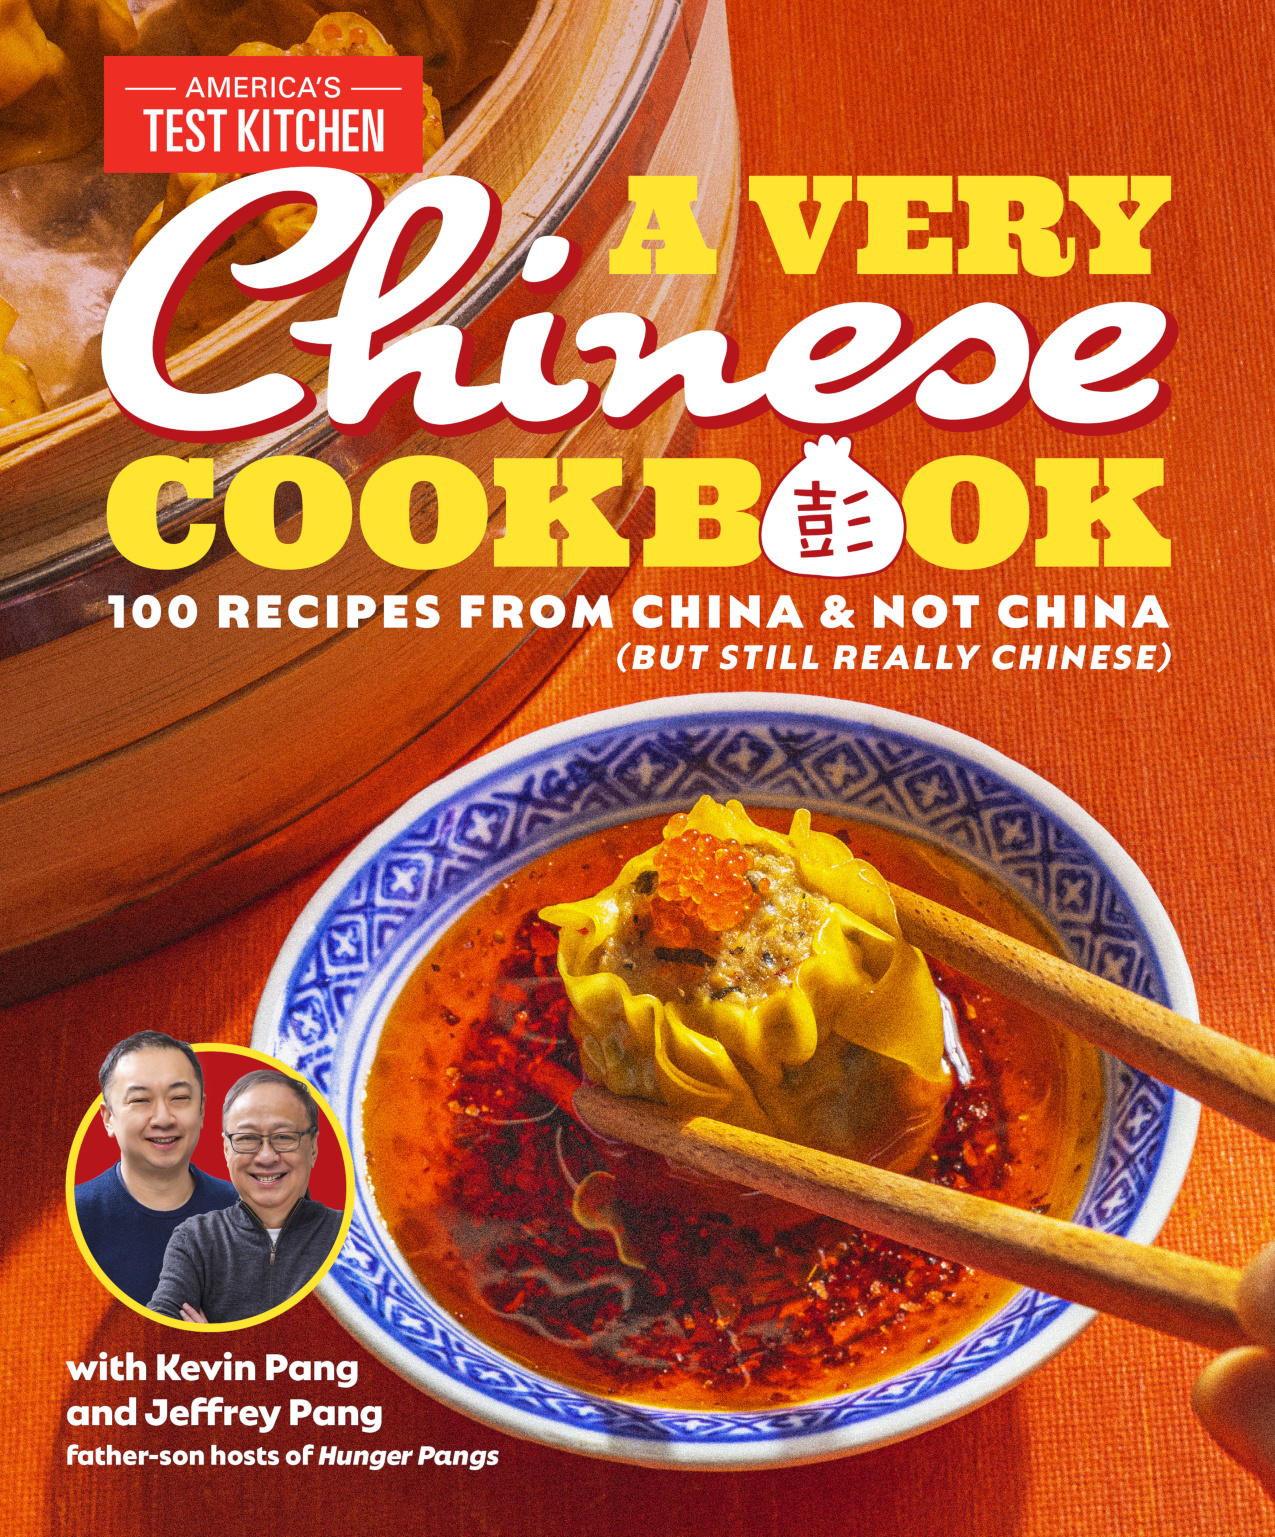 America's Test Kitchen, Kevin Pang, Jeffrey Pang: A Very Chinese Cookbook (EBook, 2023, America’s Test Kitchen)